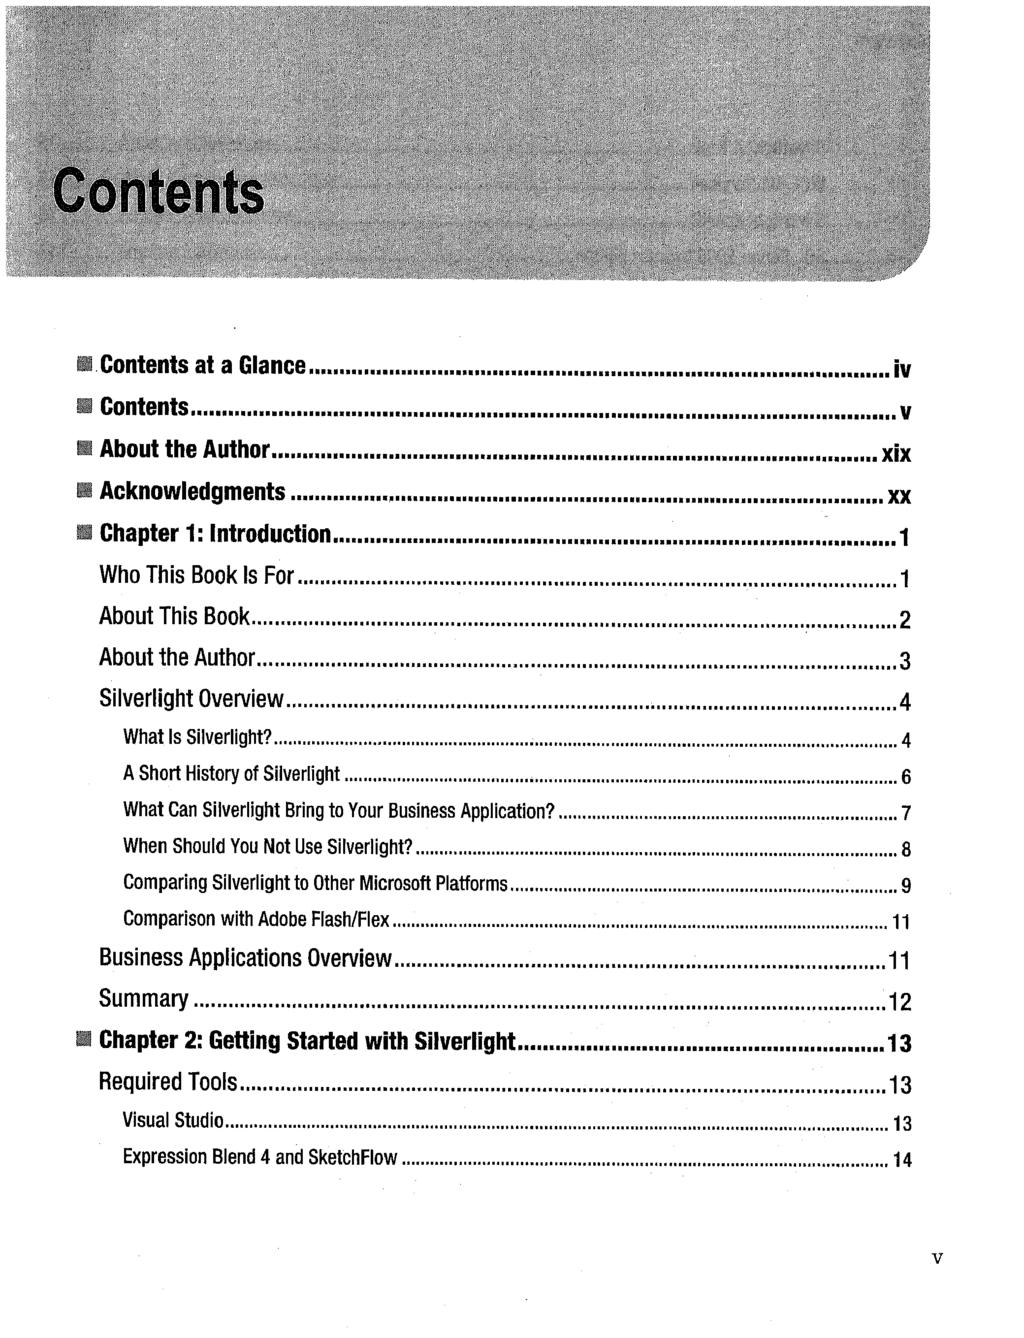 Contents at a Glance Contents About the Author Acknowledgments iv v xix xx a Chapter 1: Introduction 1 Who This Book Is For 1 About This Book 2 About the Author 3 Silverlight Overview 4 What Is